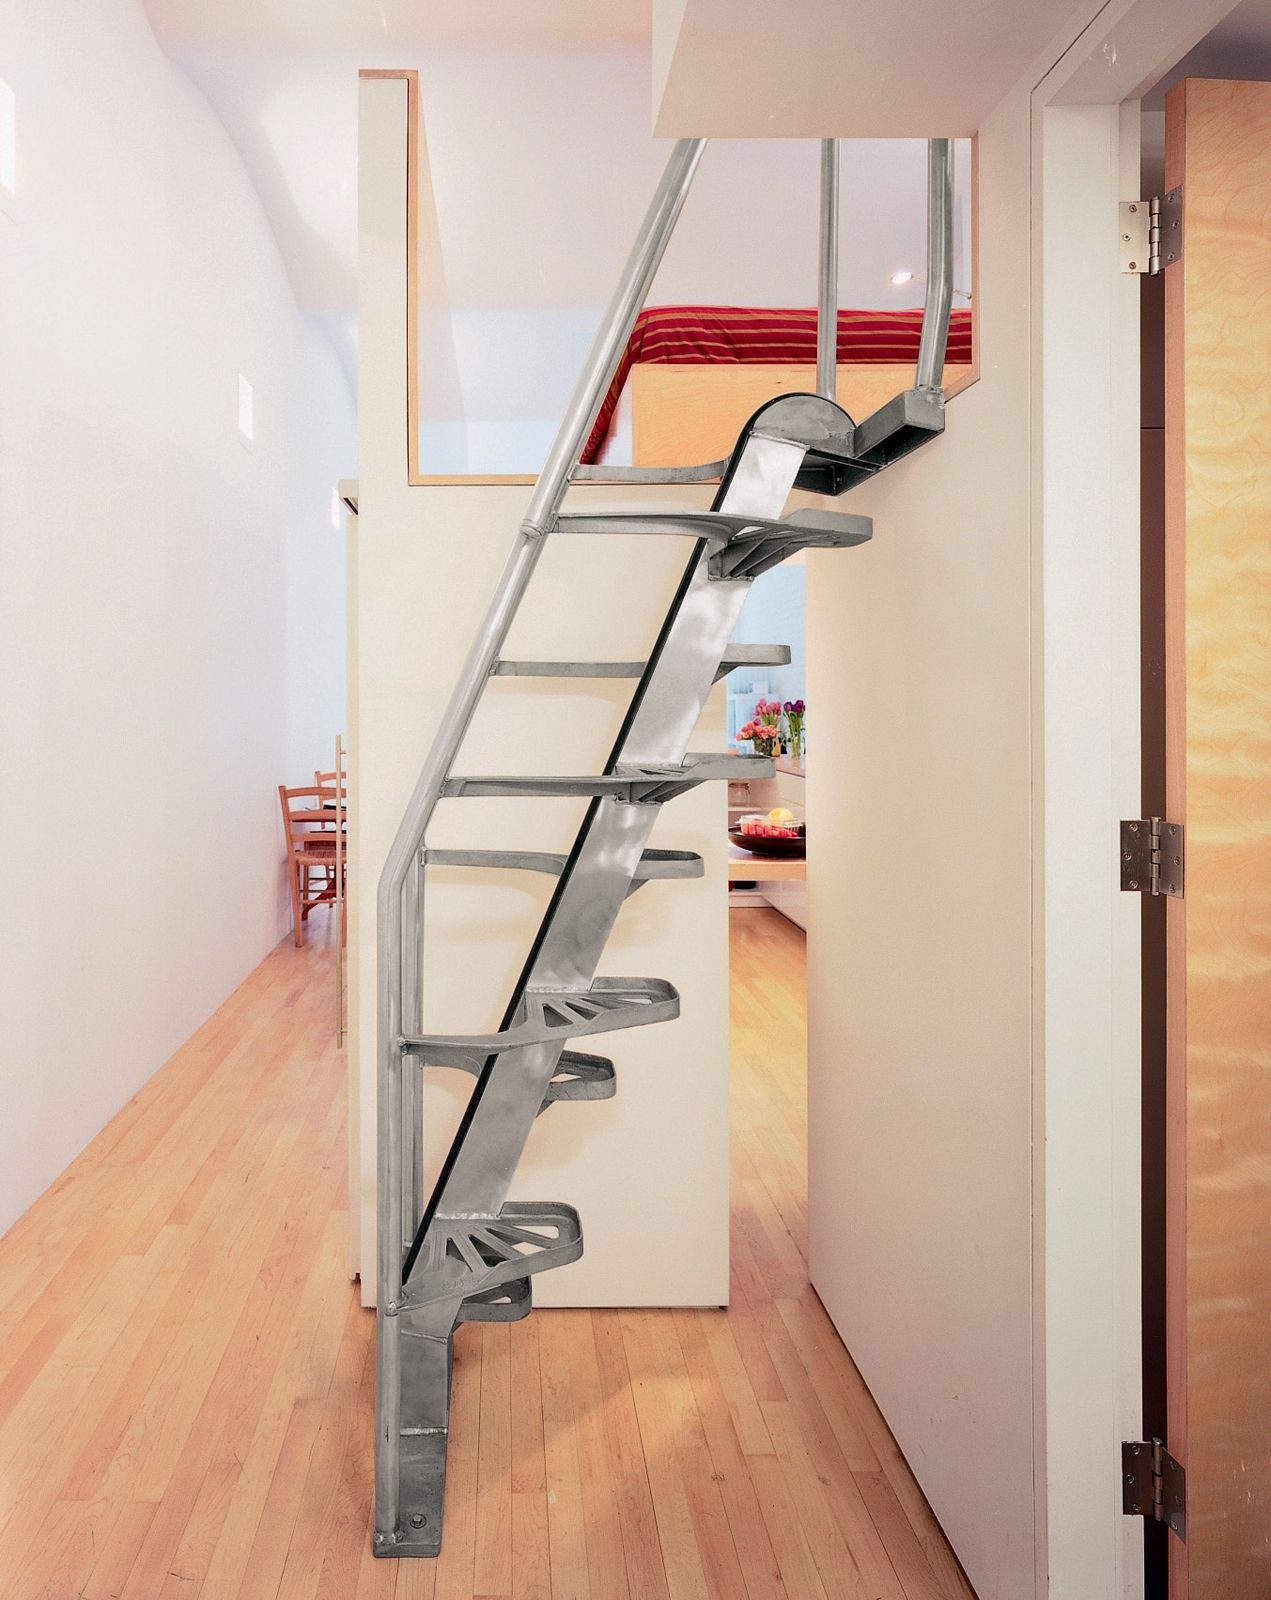 This loft stair is made by lapeyre stair it is